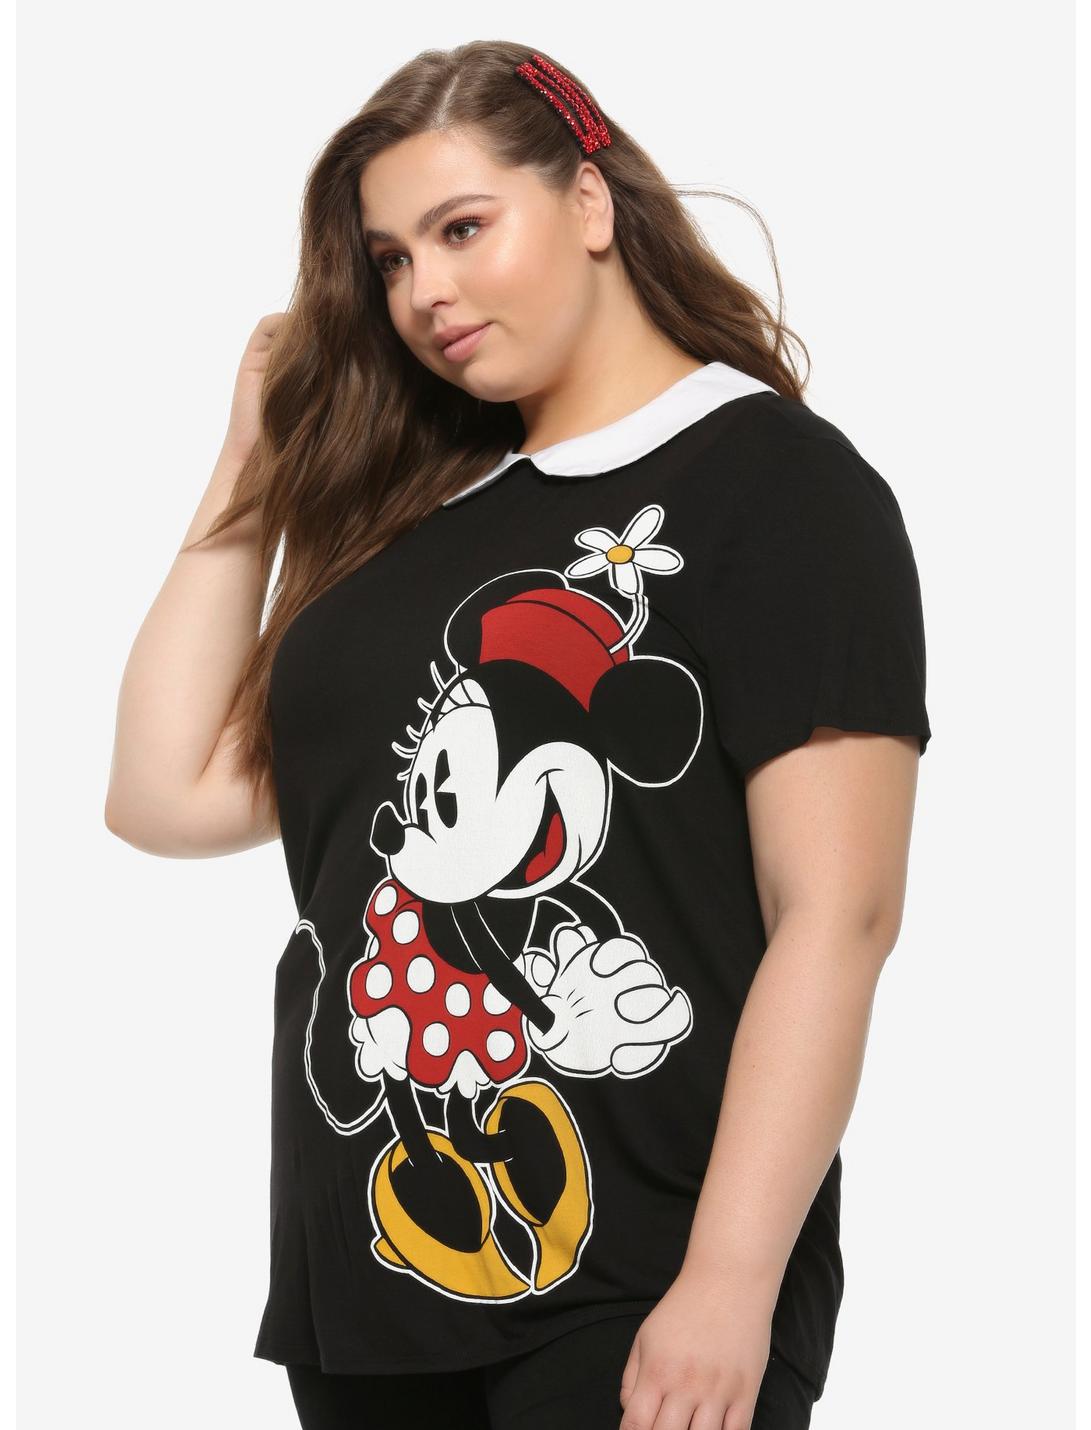 Disney Minnie Mouse Collared Girls T-Shirt Plus Size, MULTI, hi-res